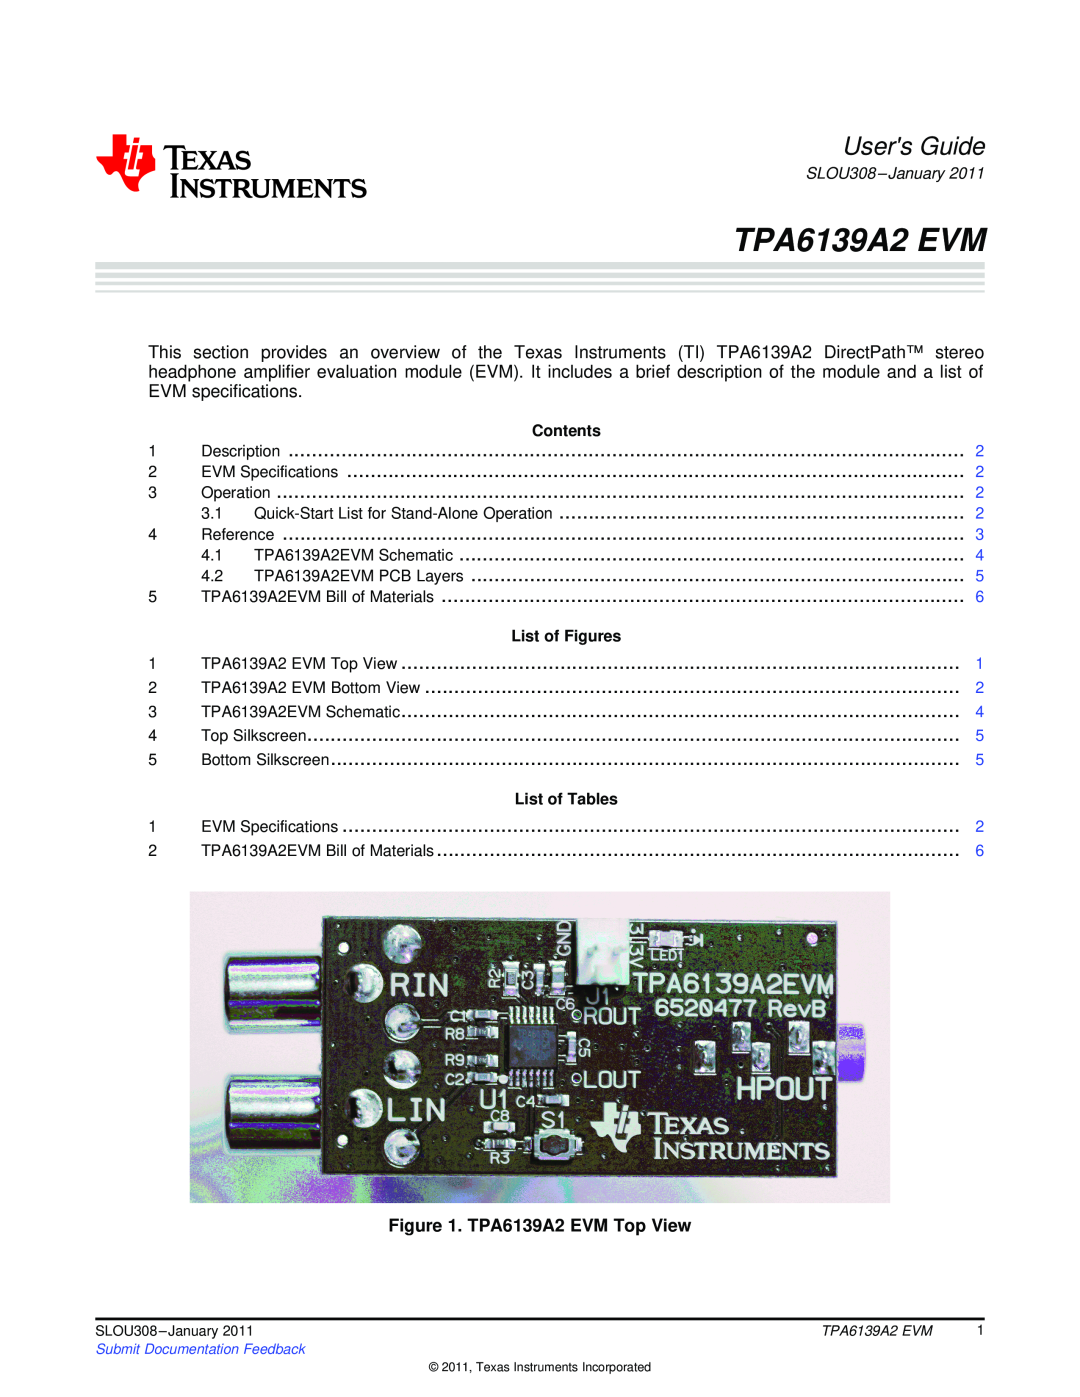 Texas Instruments specifications TPA6139A2 EVM Top View, Users Guide, Description, EVM Specifications, Operation 